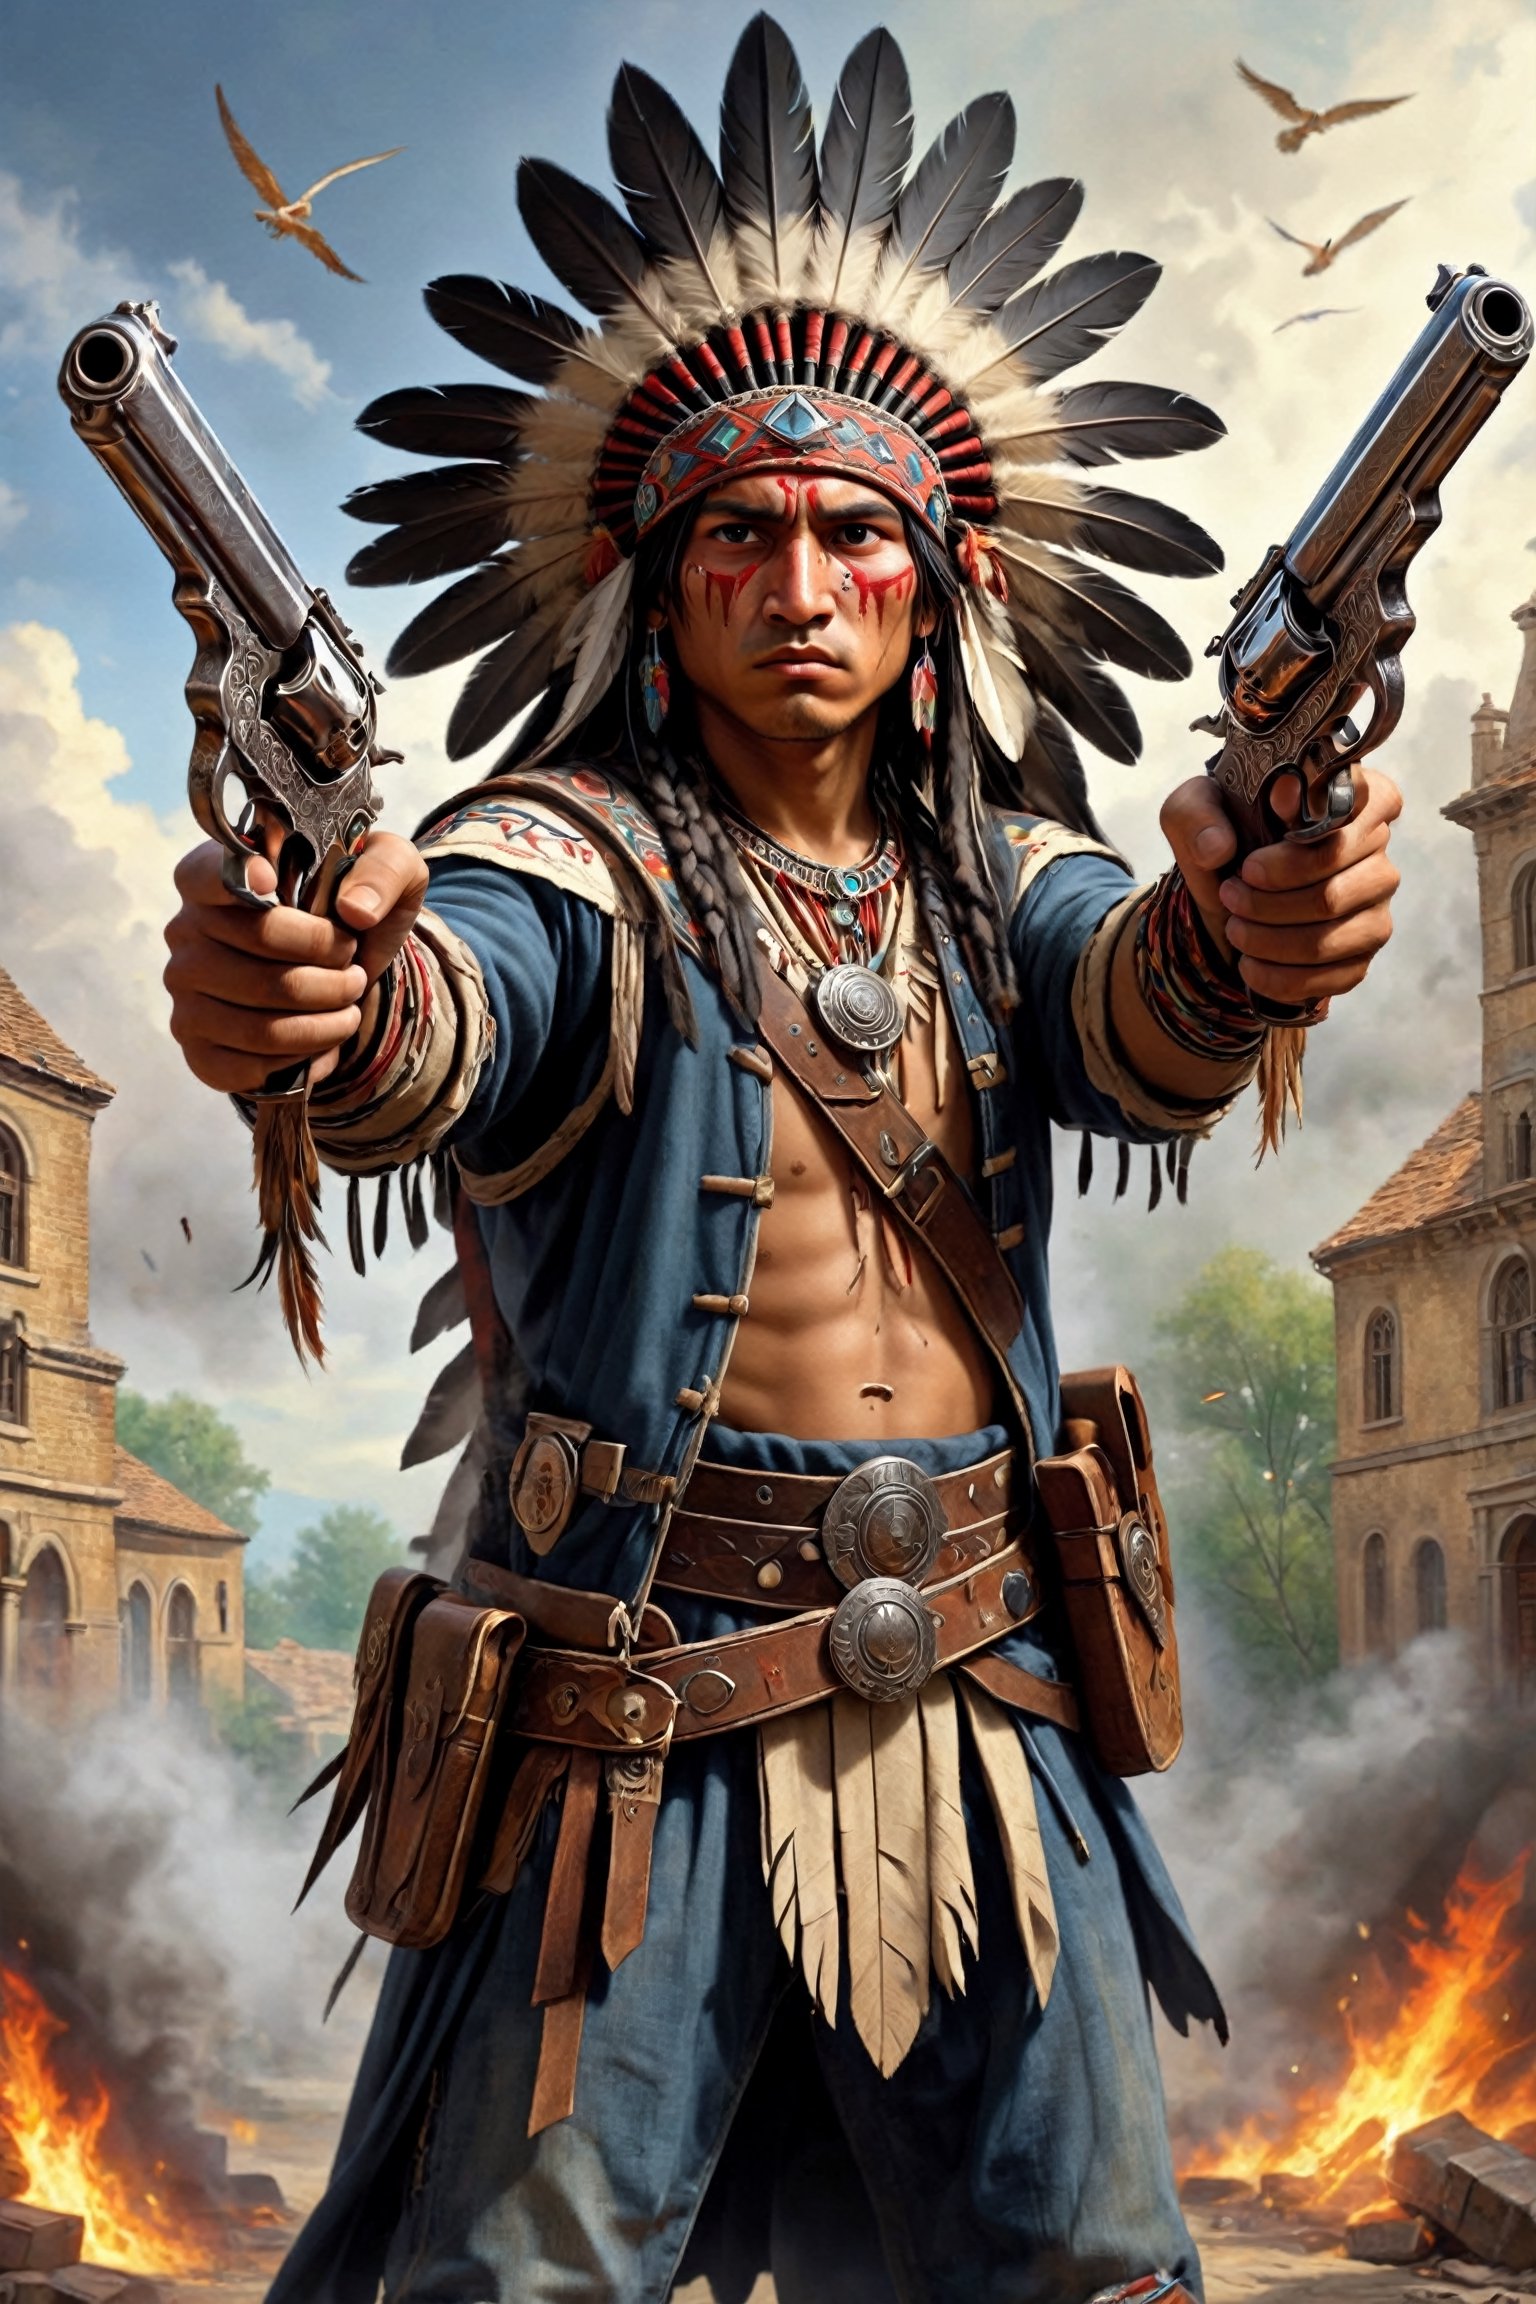 Hard-boiled atmosphere, oil art,1man, young Native American warrior,A sharp gaze full of anger, anger face, traditional Native American costume, war bonnet, eagle feather,Dual pistol in each hand,strikes a dynamic Akimbo pose,Dual_wield,Oil painting of Mona Lisa ,abmhandsomeguy,dual pistols